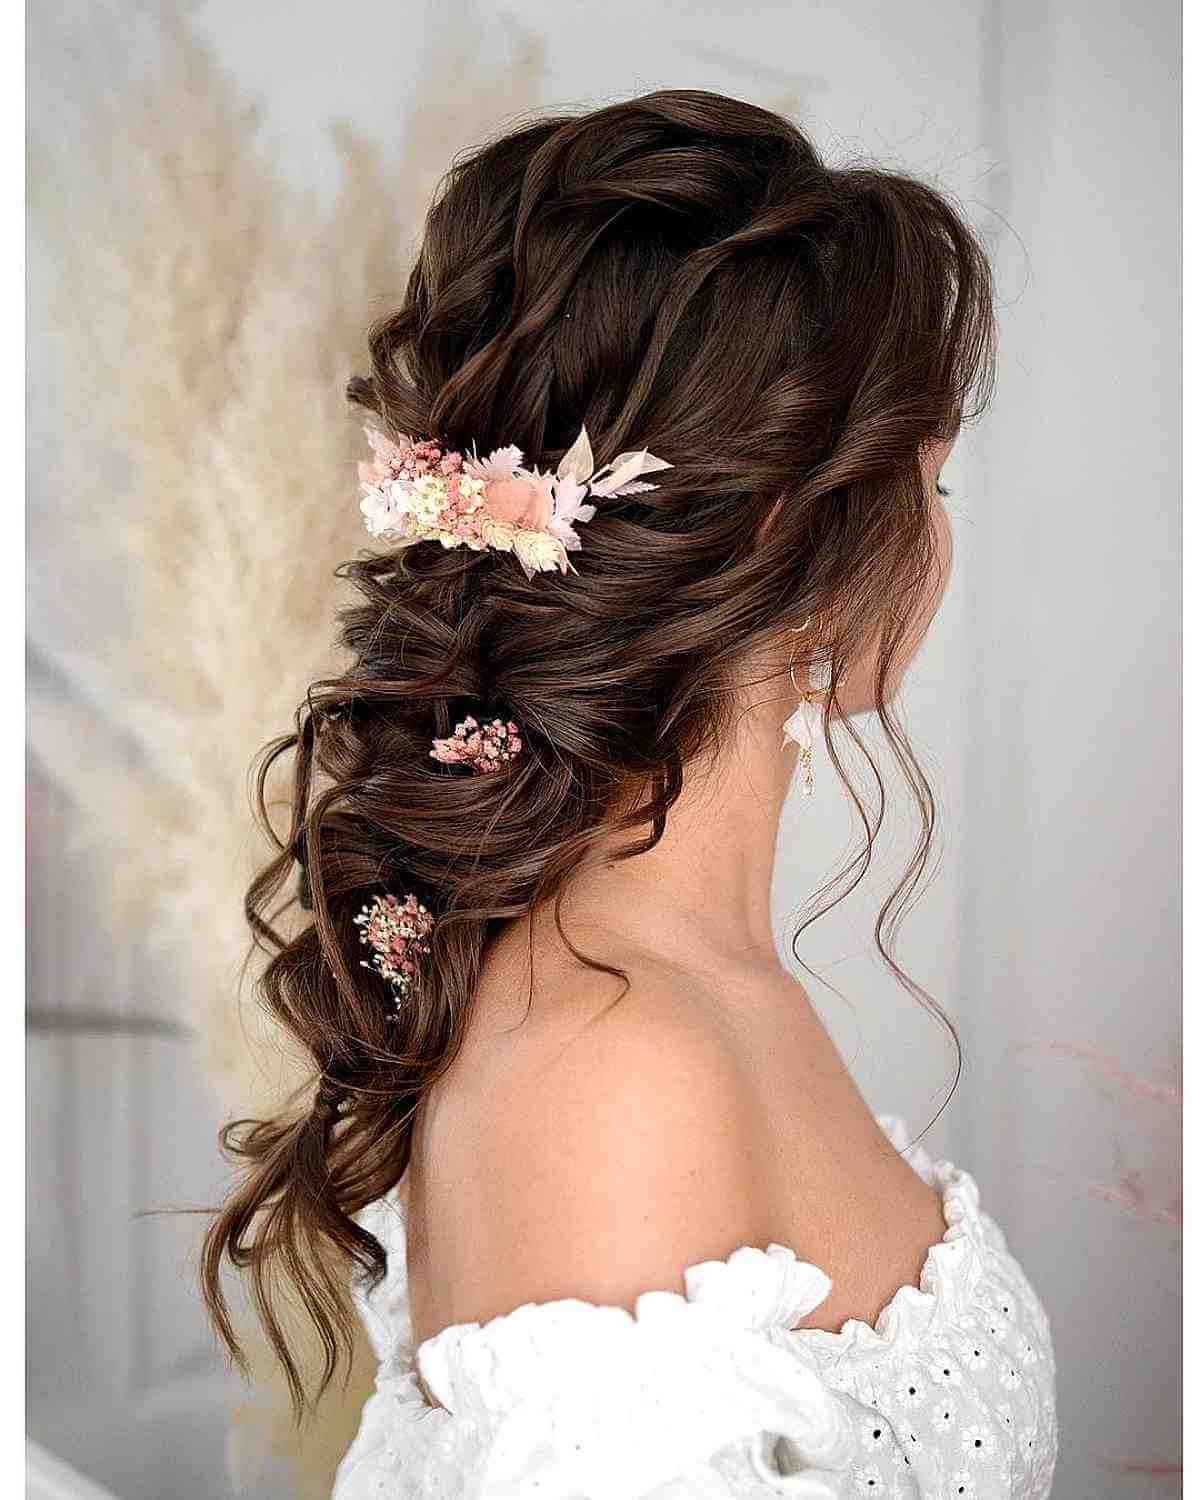 Stunning Messy Braid with Flowers for a Wedding